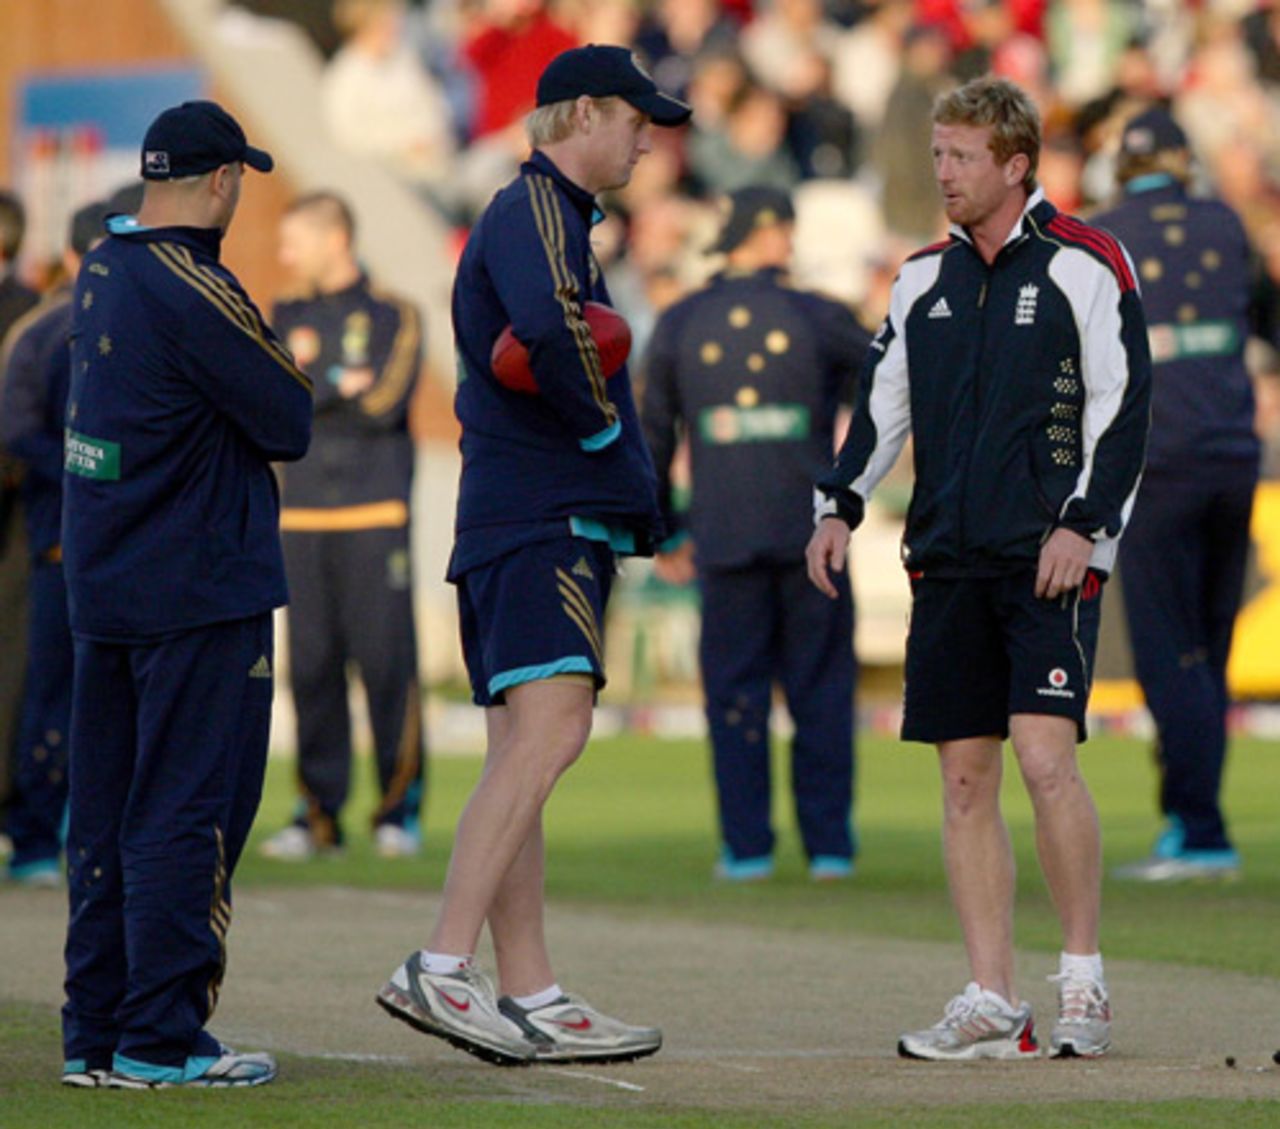 Cameron White and Paul Collingwood discuss conditions at Old Trafford before the abandonment, England v Australia, 2nd Twenty20, Old Trafford, September 1, 2009